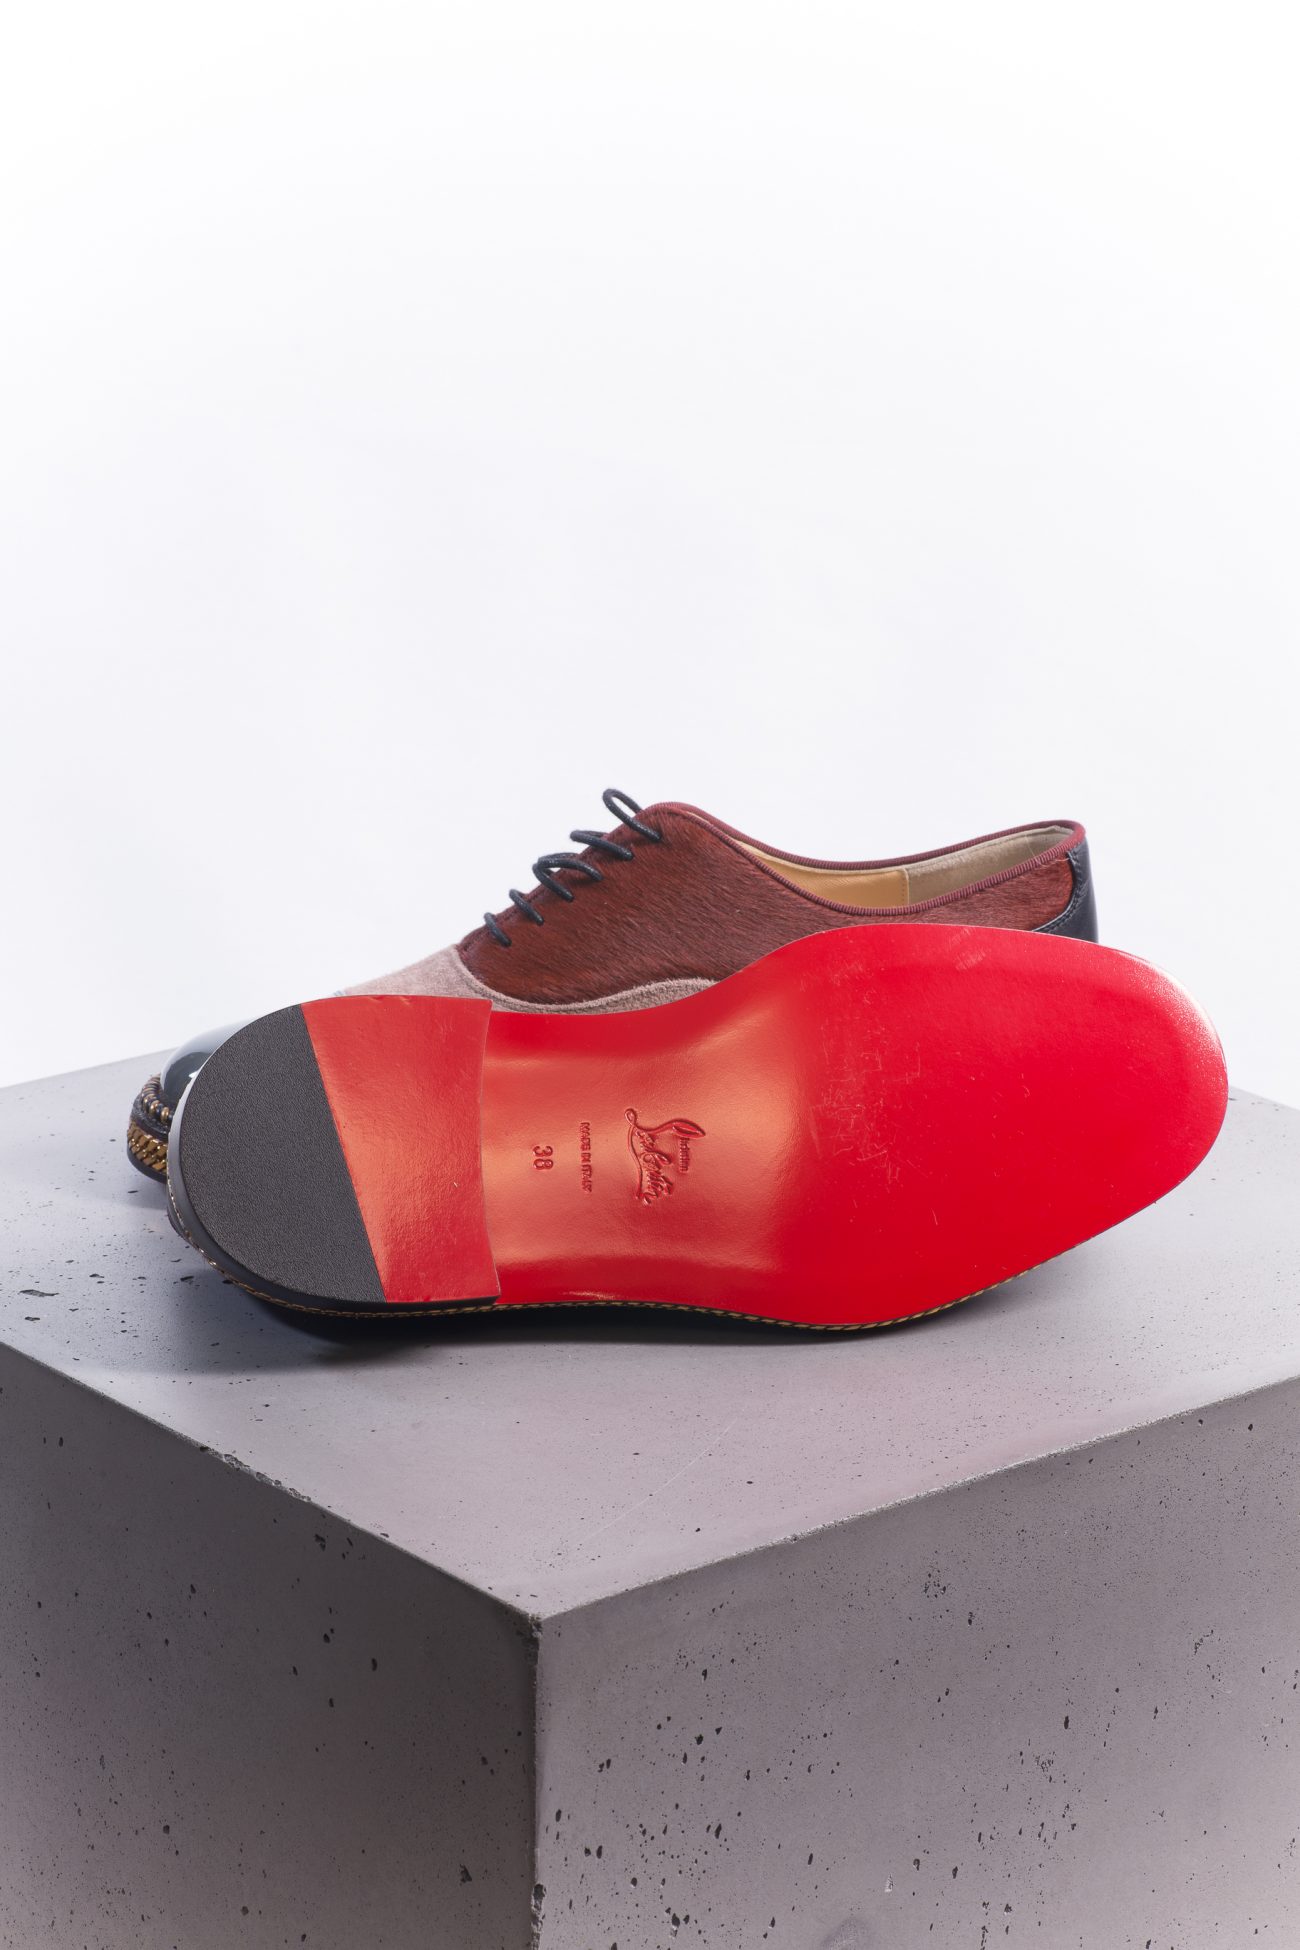 Christian Louboutin Latcho Mixed-Media Oxfords Loafers